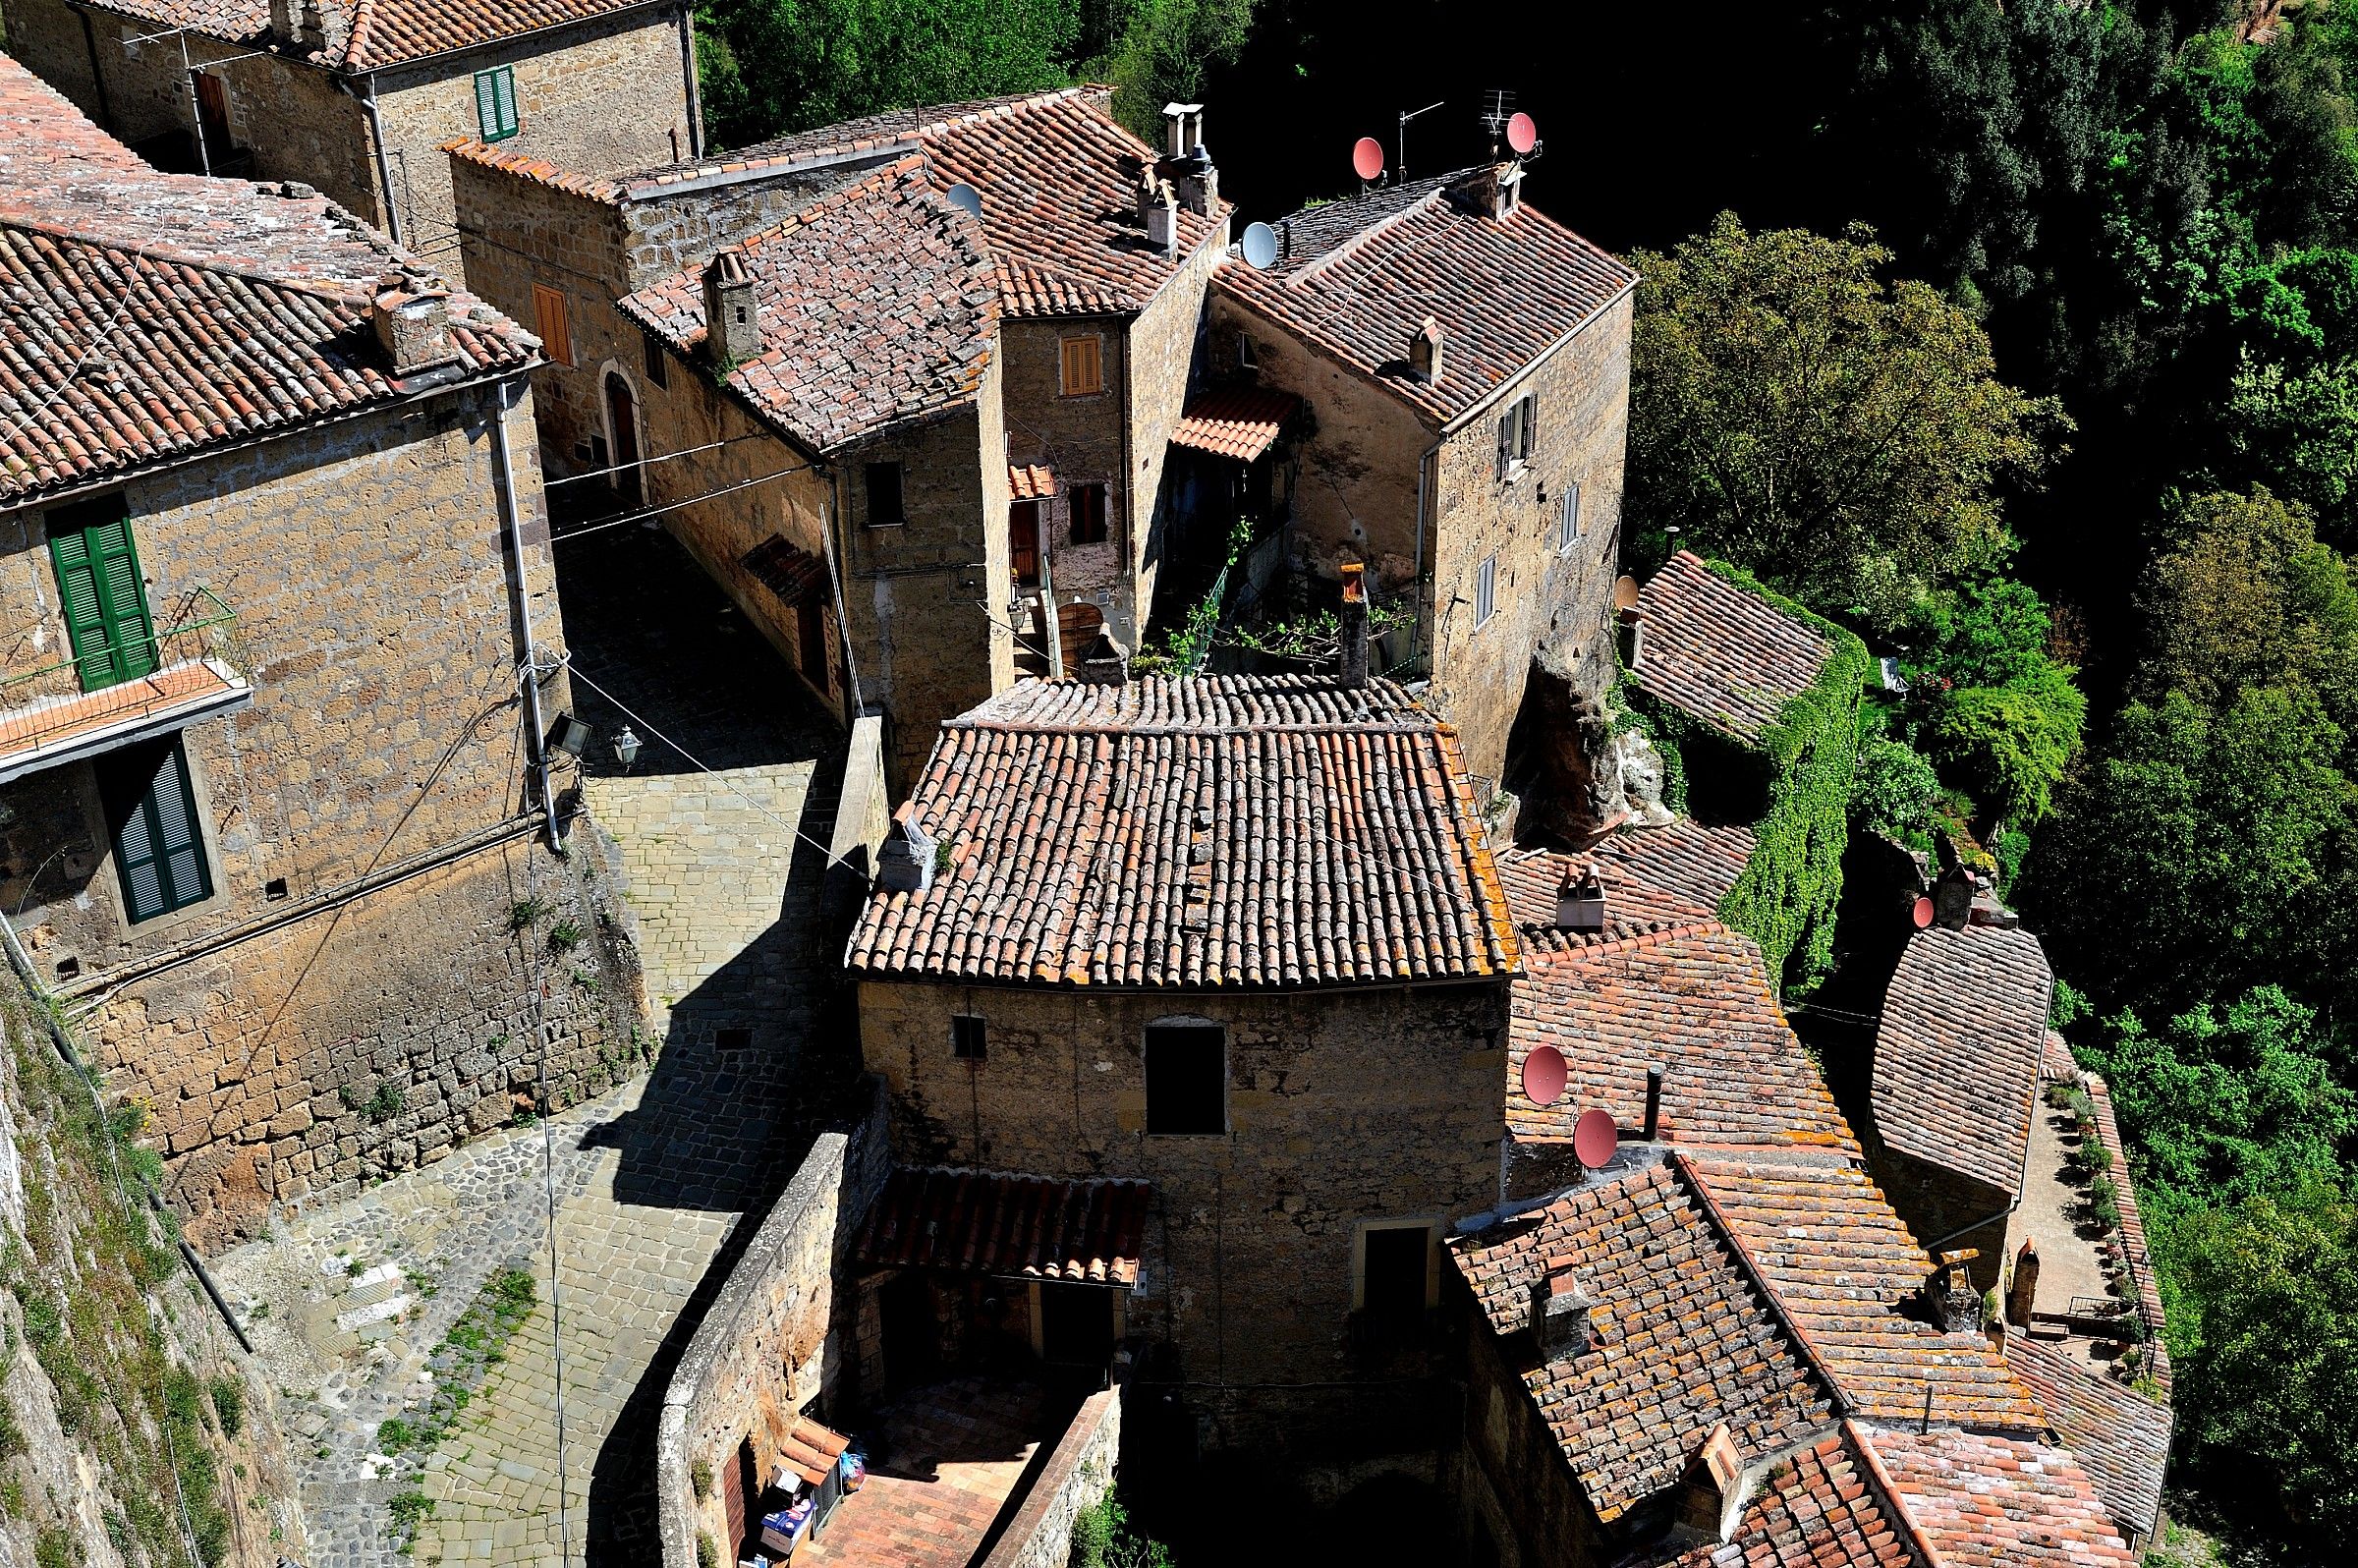 The roofs of Sorano / gr)...